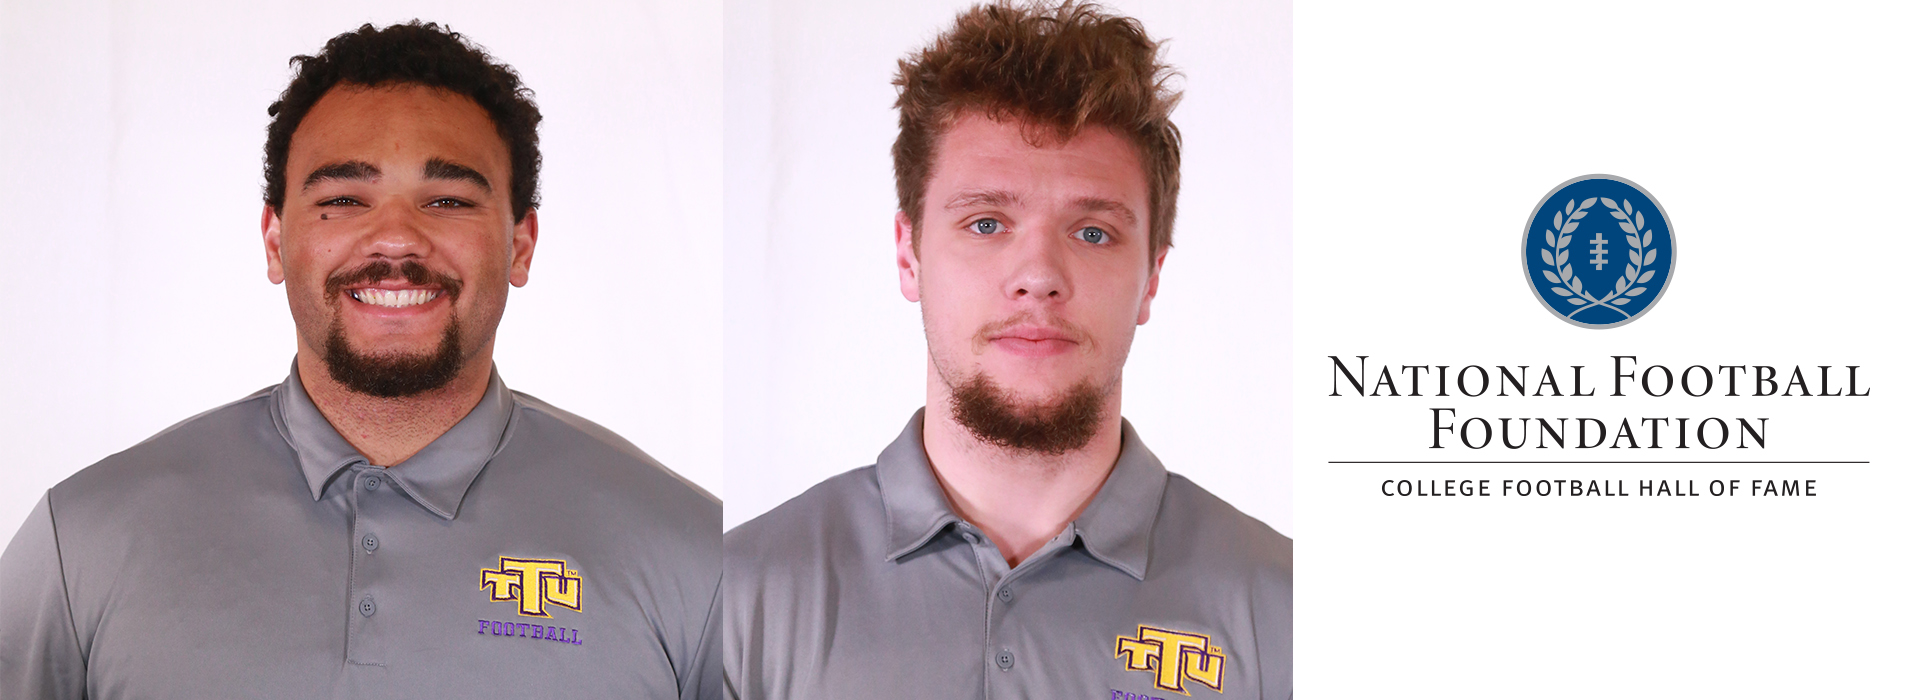 Tech's Rhoades, Kilpatrick selected to NFF Hampshire Honor Society